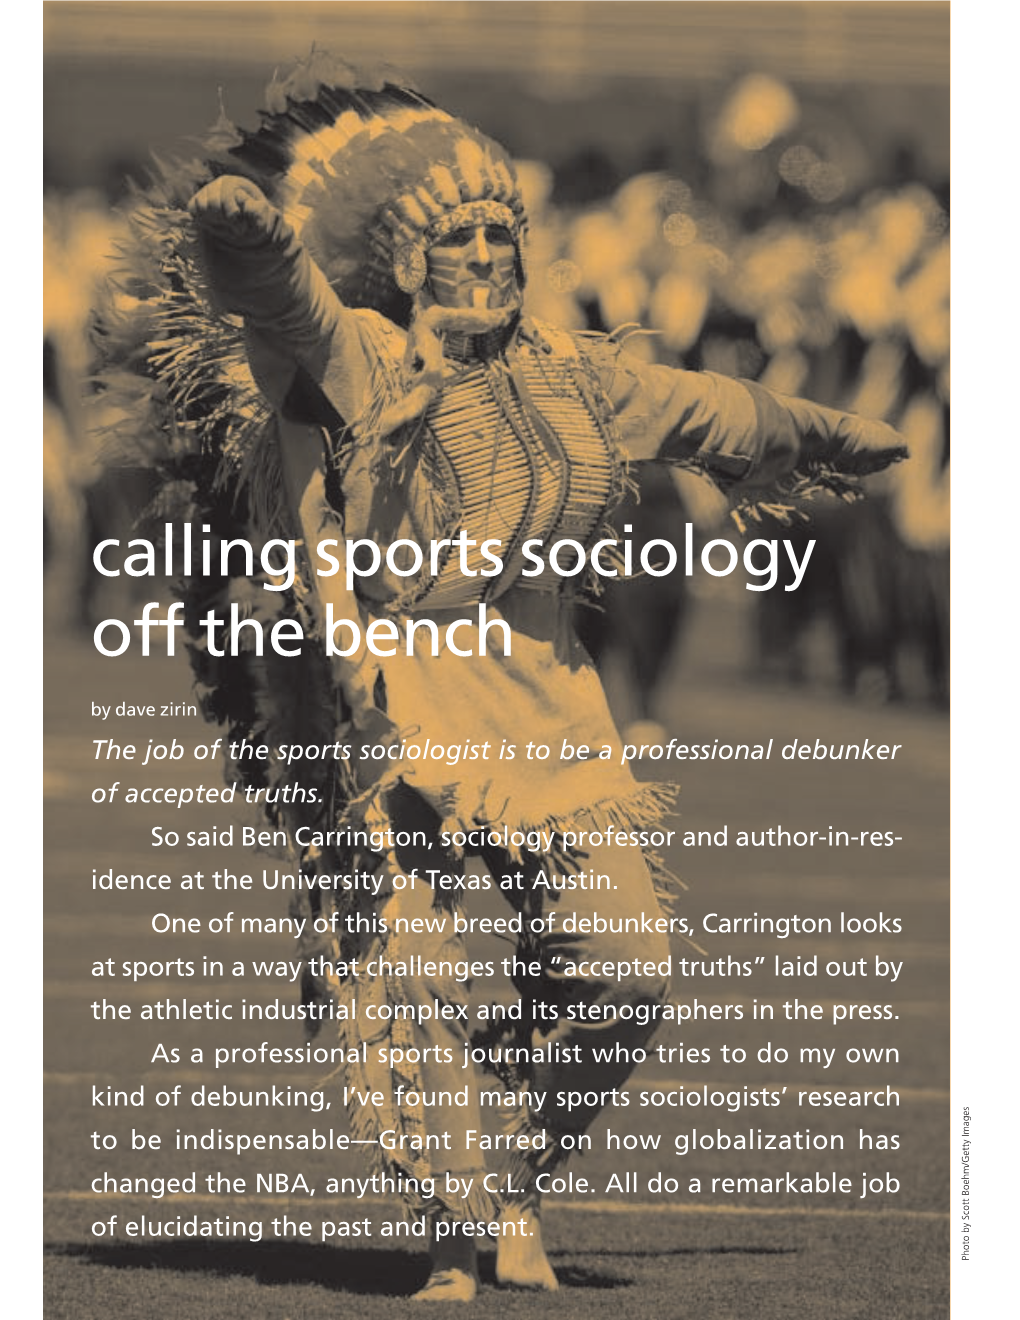 Calling Sports Sociology Off the Bench